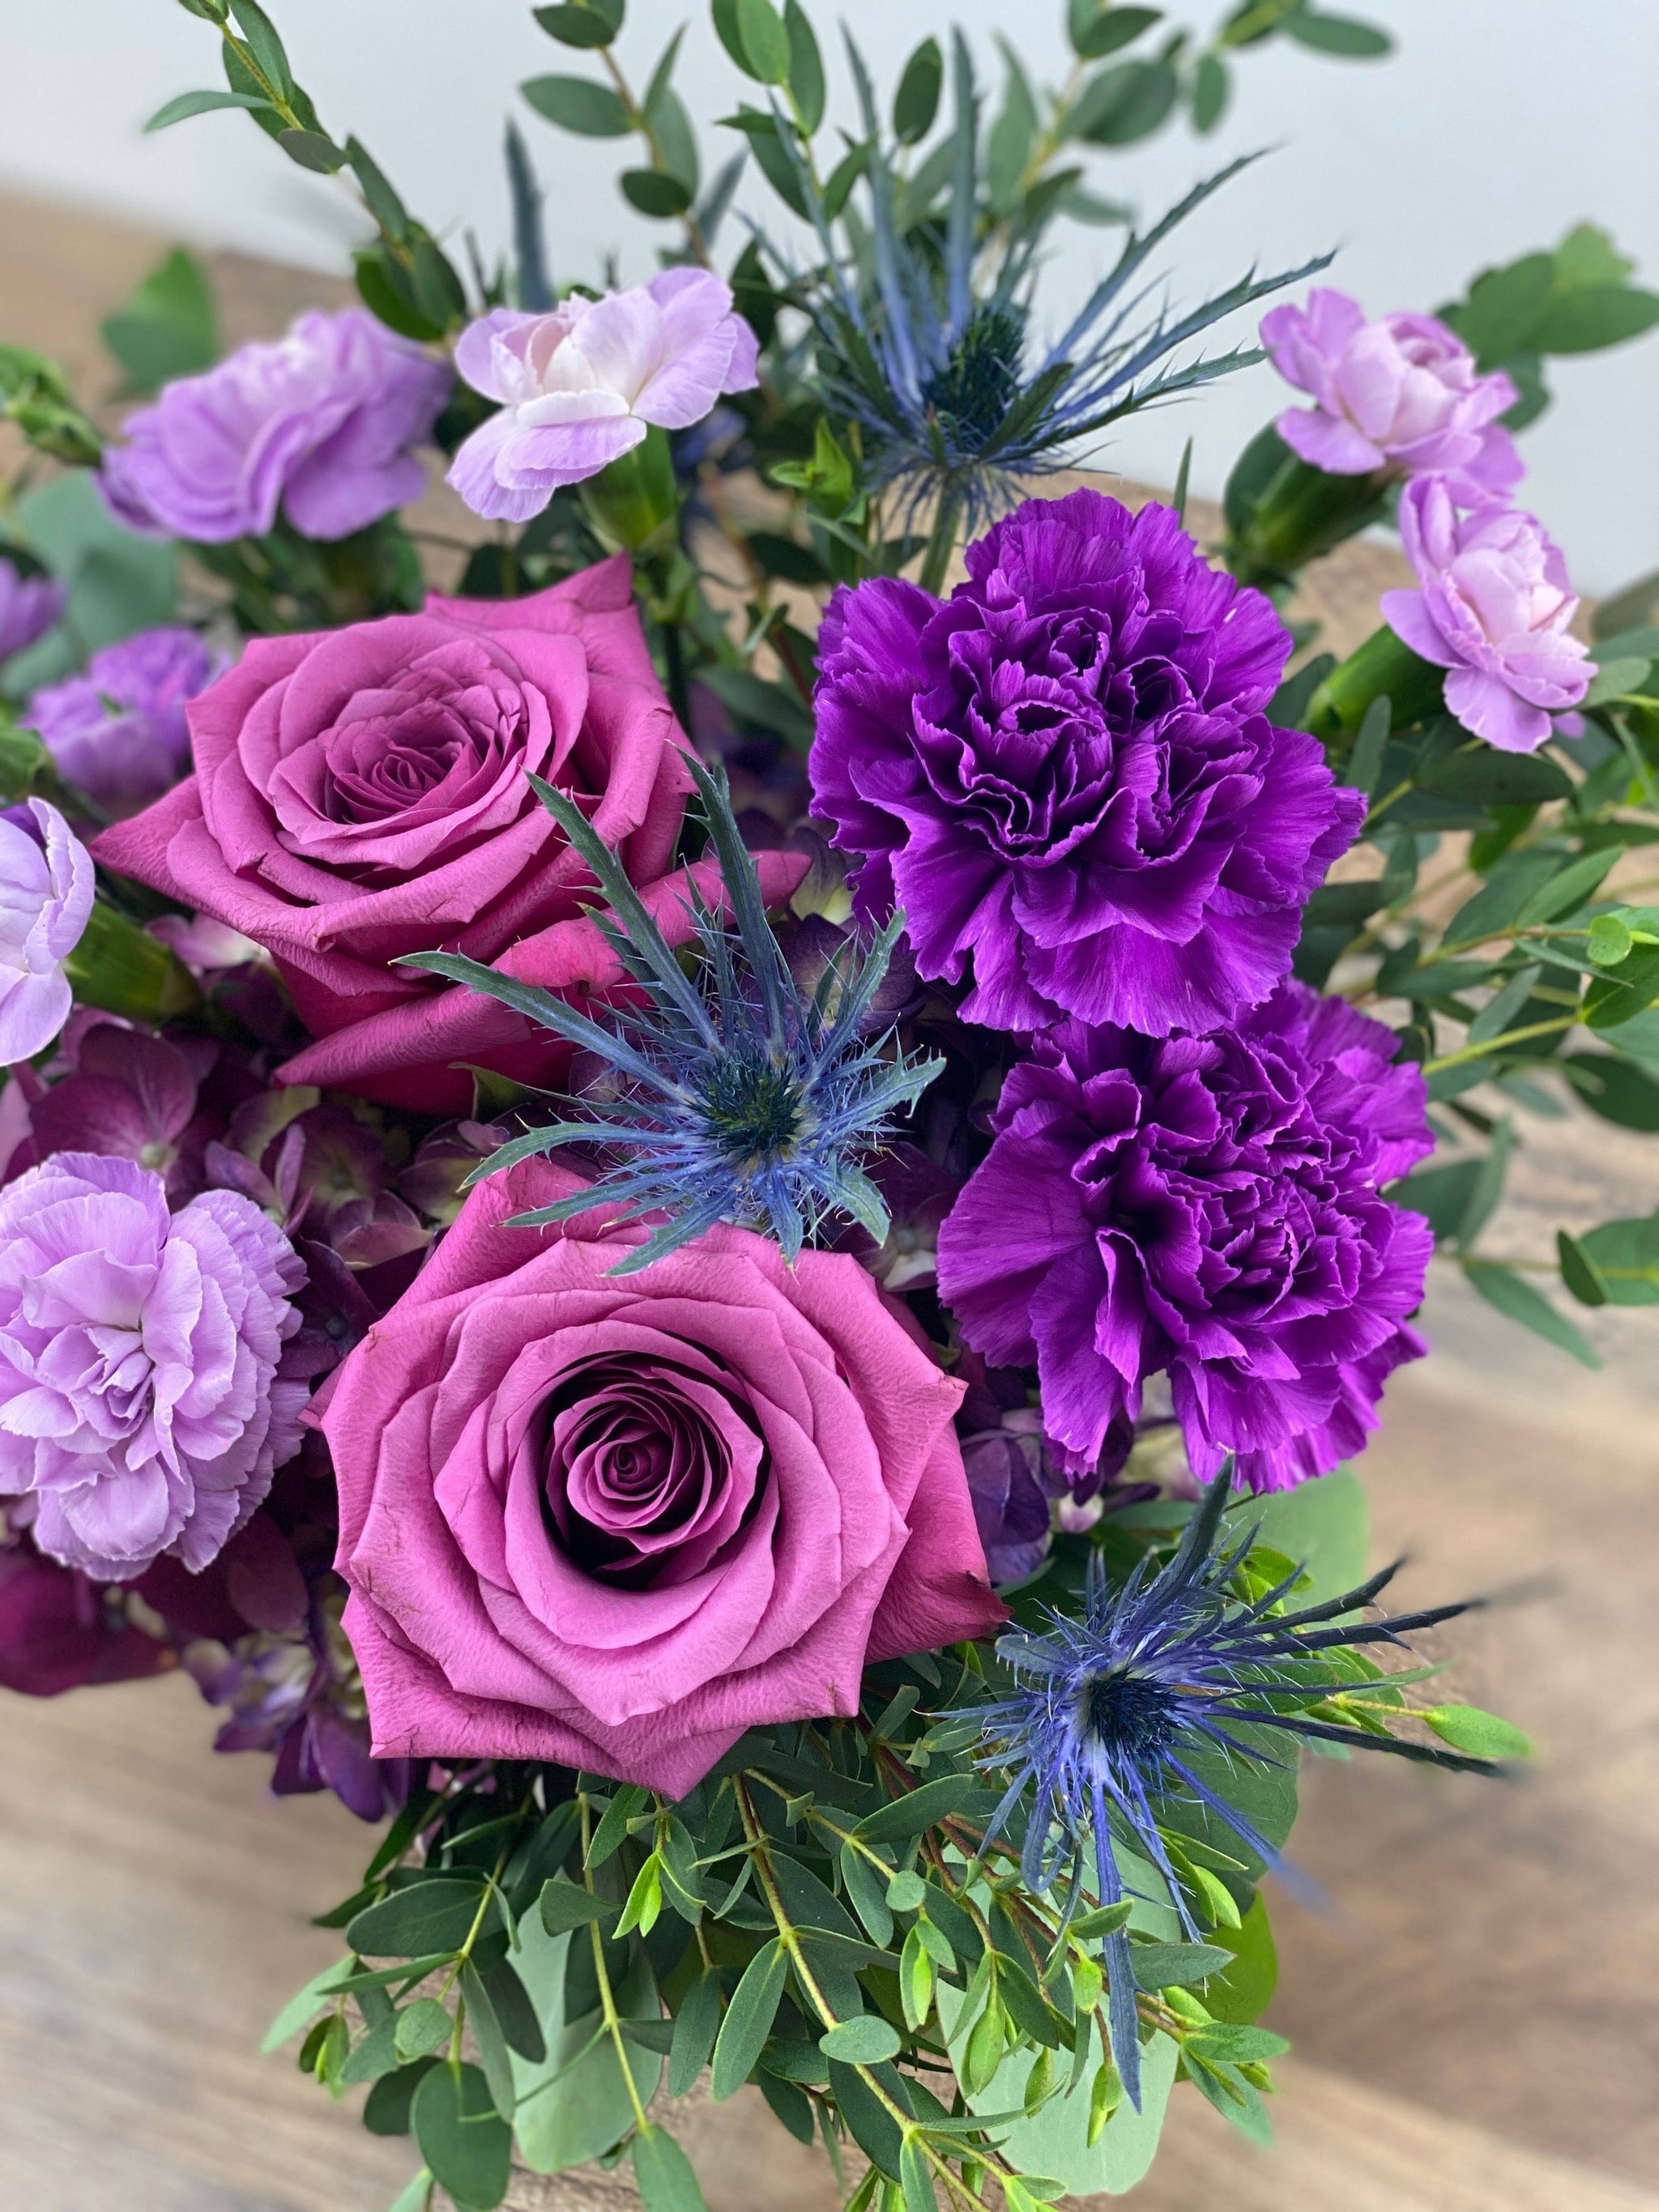 The Floratory is a funeral home and florist in Peoria, Illinois. We offer online flowers delivery of sympathy flowers or plants to honor the life of your loved one.